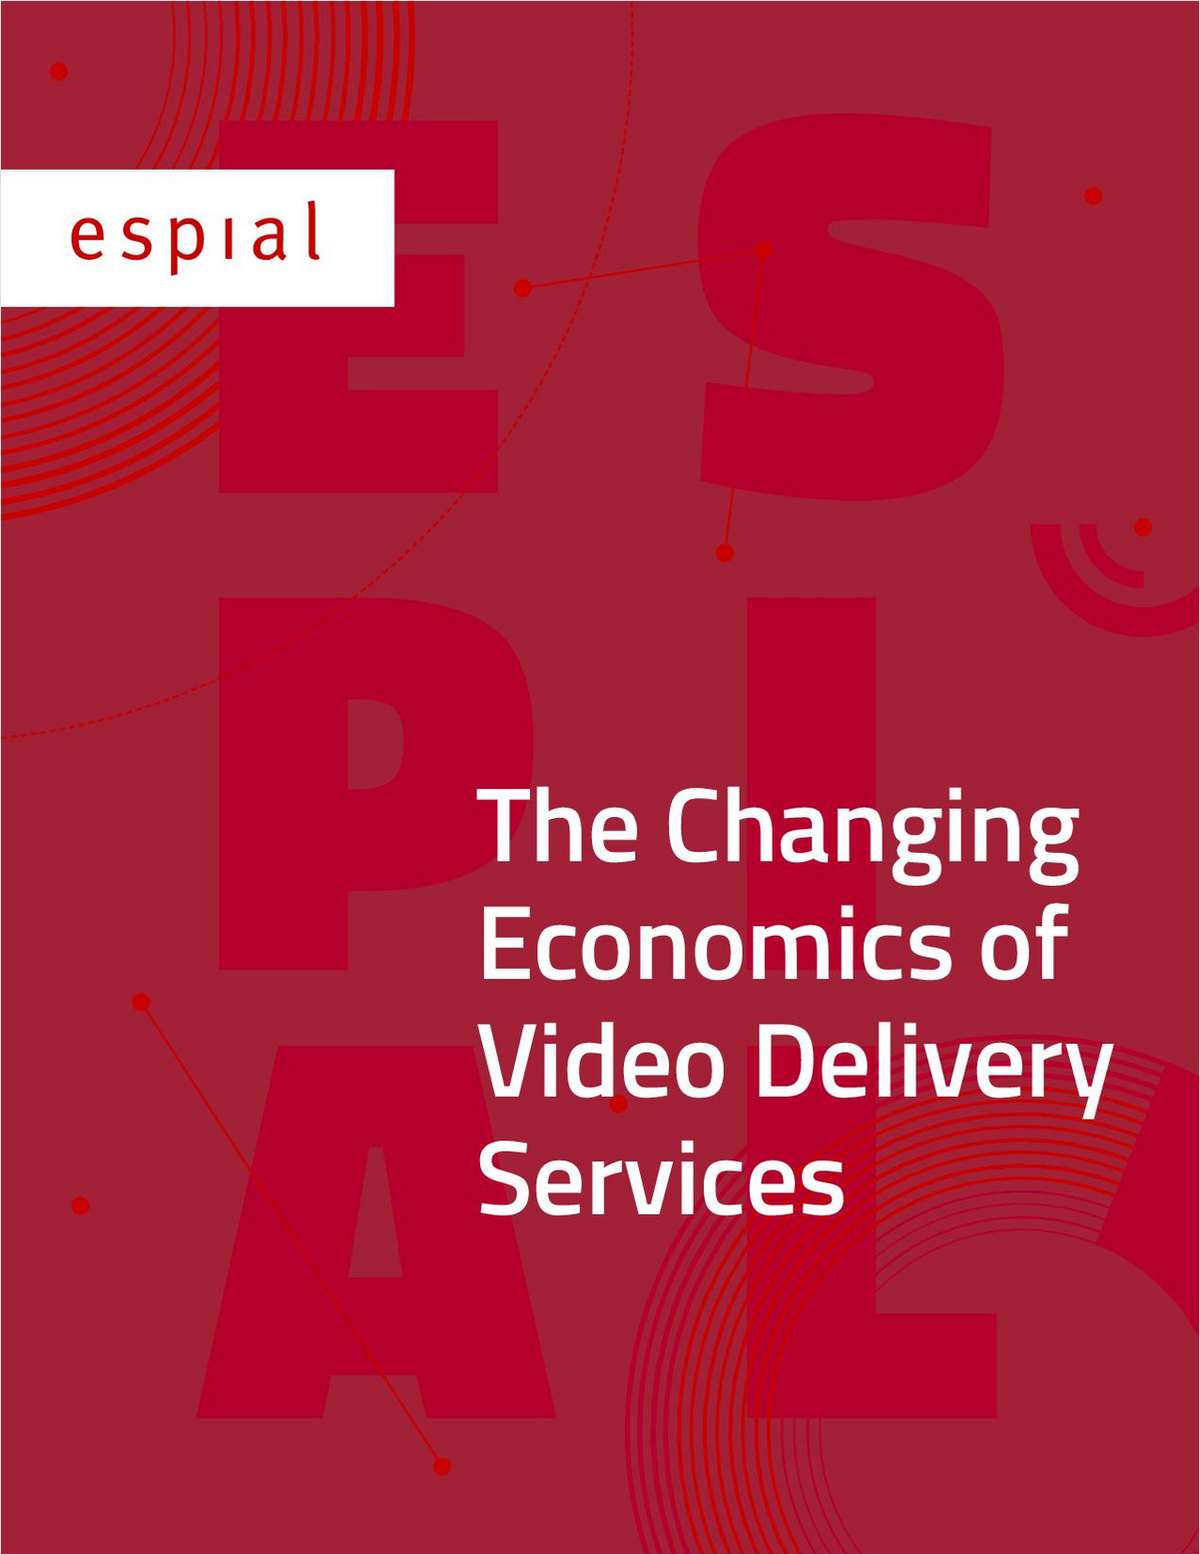 The Changing Economics of Video Delivery Services